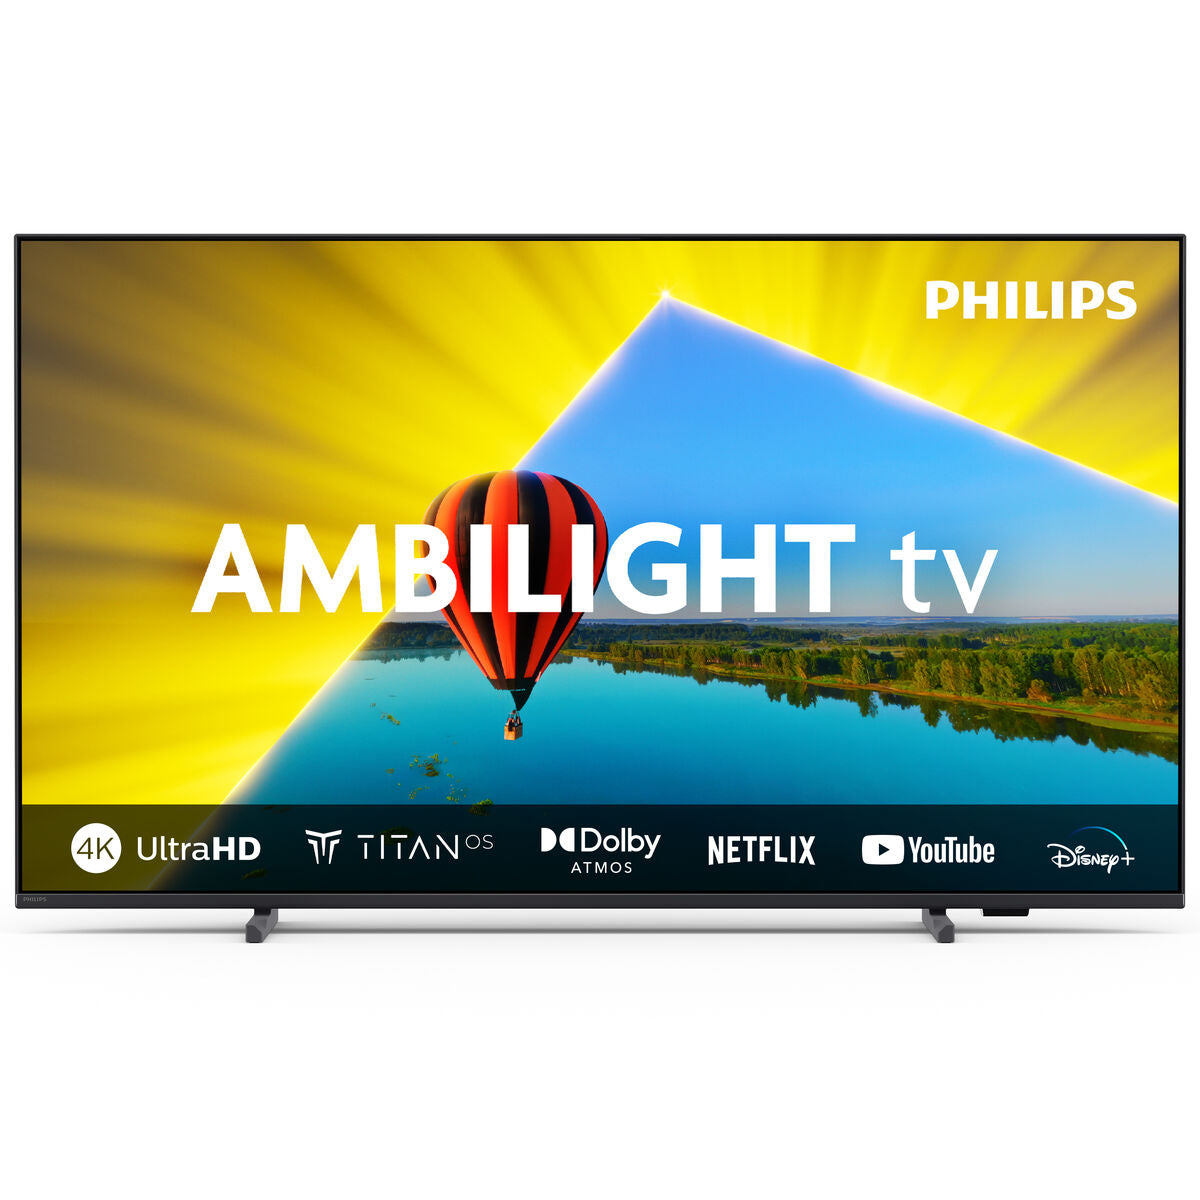 Smart TV Philips 43PUS8079 4K Ultra HD 43" LED, Philips, Electronics, TV, Video and home cinema, smart-tv-philips-43pus8079-4k-ultra-hd-43-led, Brand_Philips, category-reference-2609, category-reference-2625, category-reference-2931, category-reference-t-18805, category-reference-t-18827, category-reference-t-19653, cinema and television, Condition_NEW, entertainment, Price_400 - 500, RiotNook